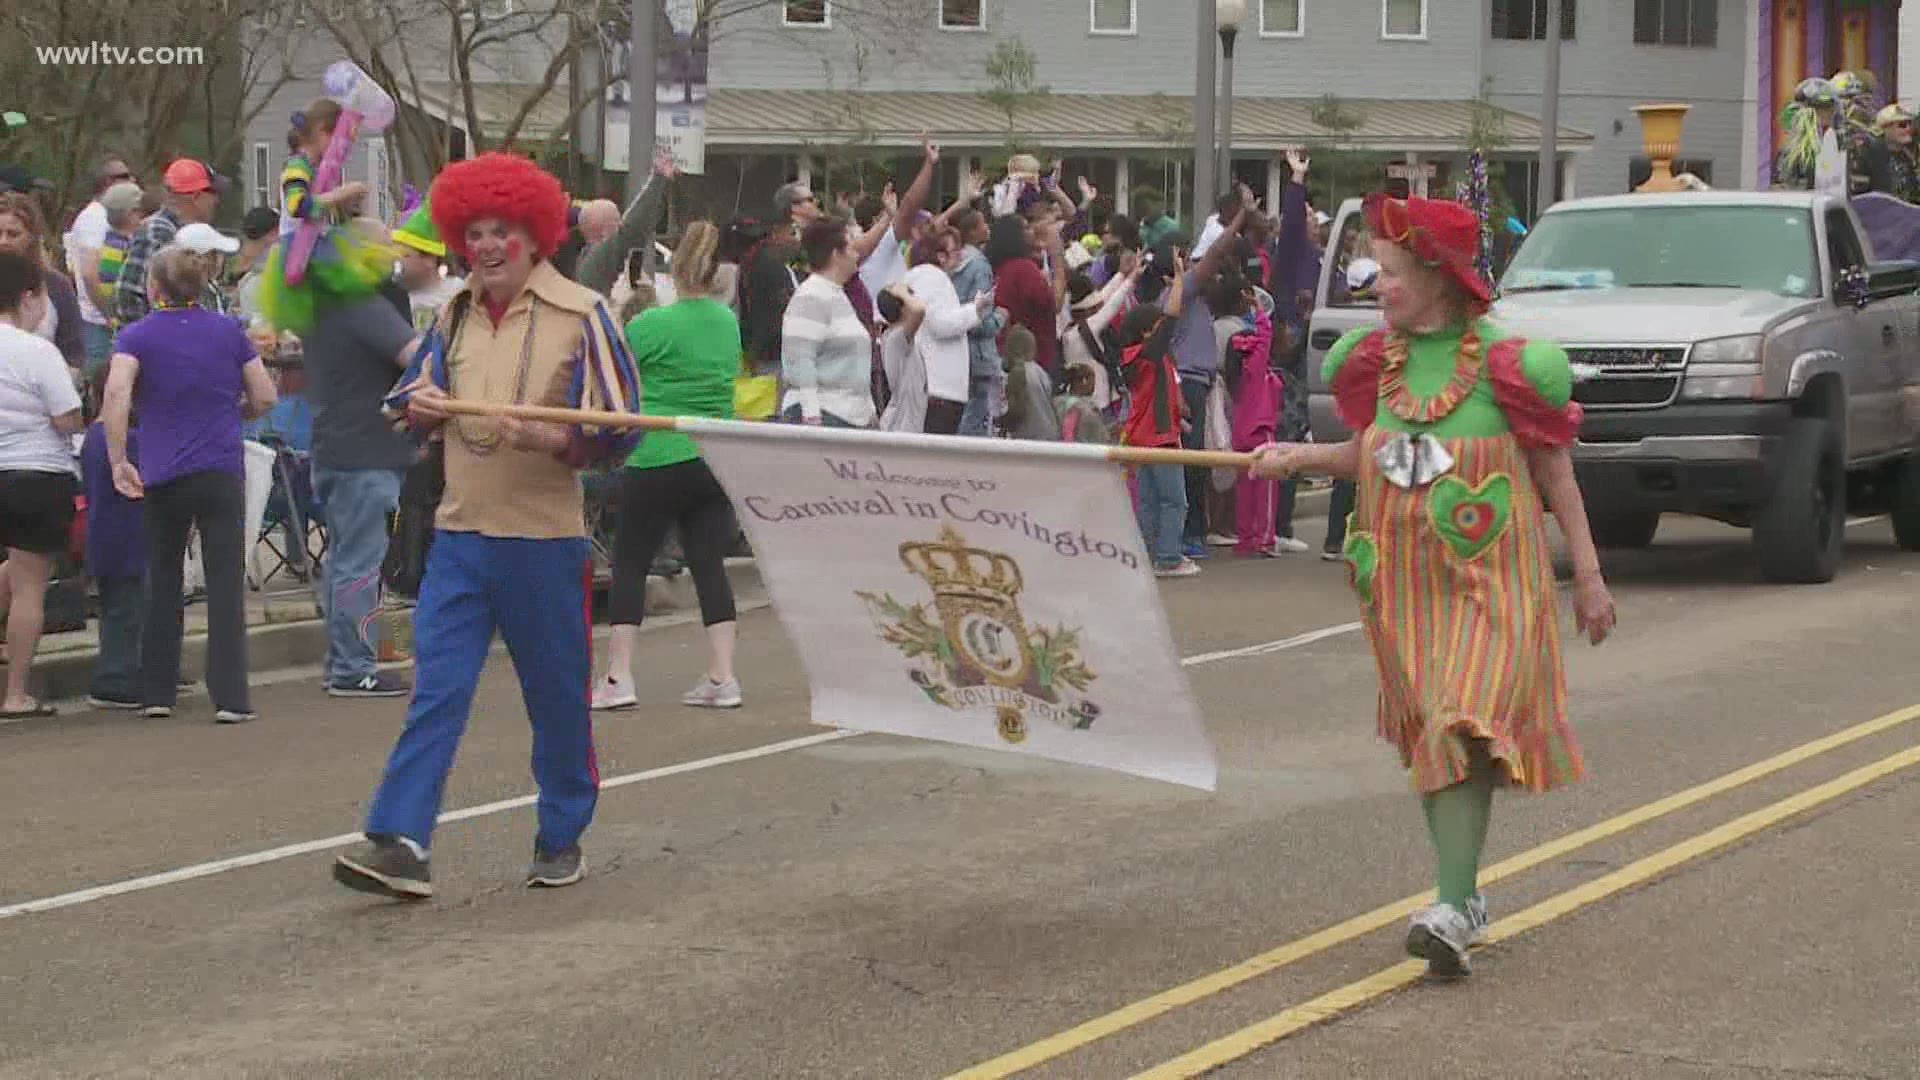 One day after New Orleans announced there would be no Mardi Gras parades in 2021, leaders in St. Tammany say there's still a chance krewes could roll.